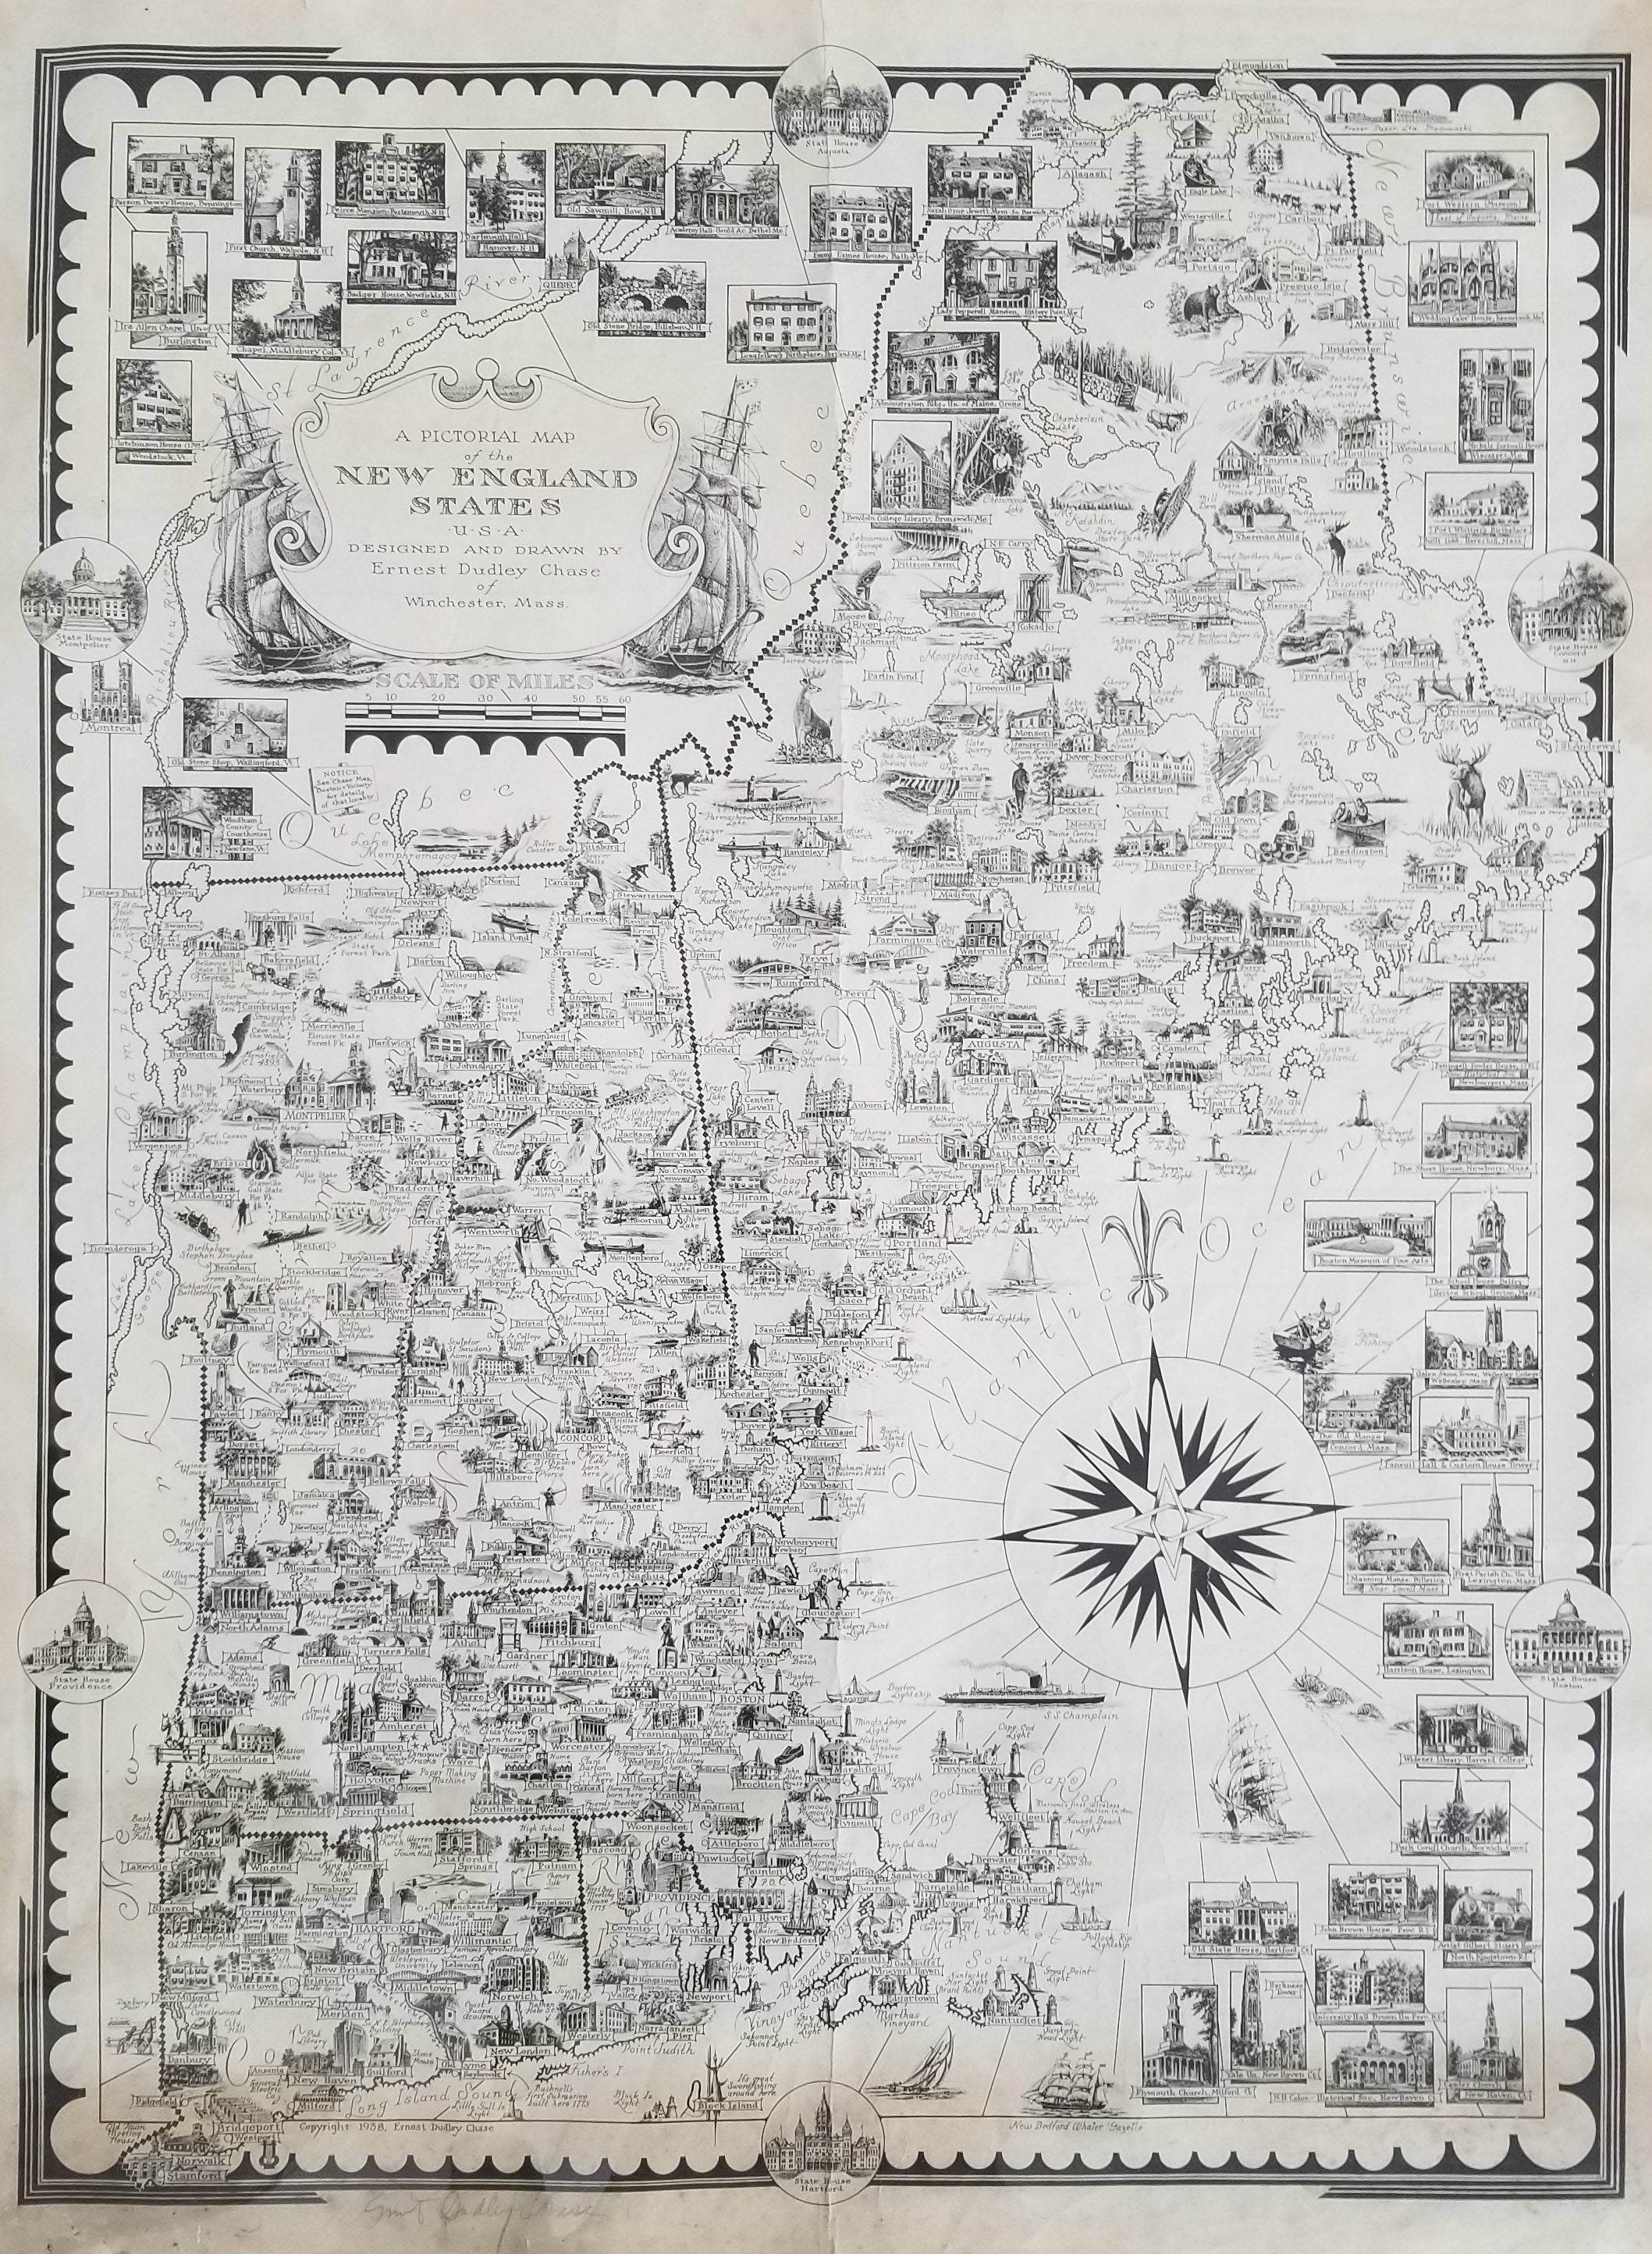 (U.S.-New England) A Pictorial Map of the New England States.